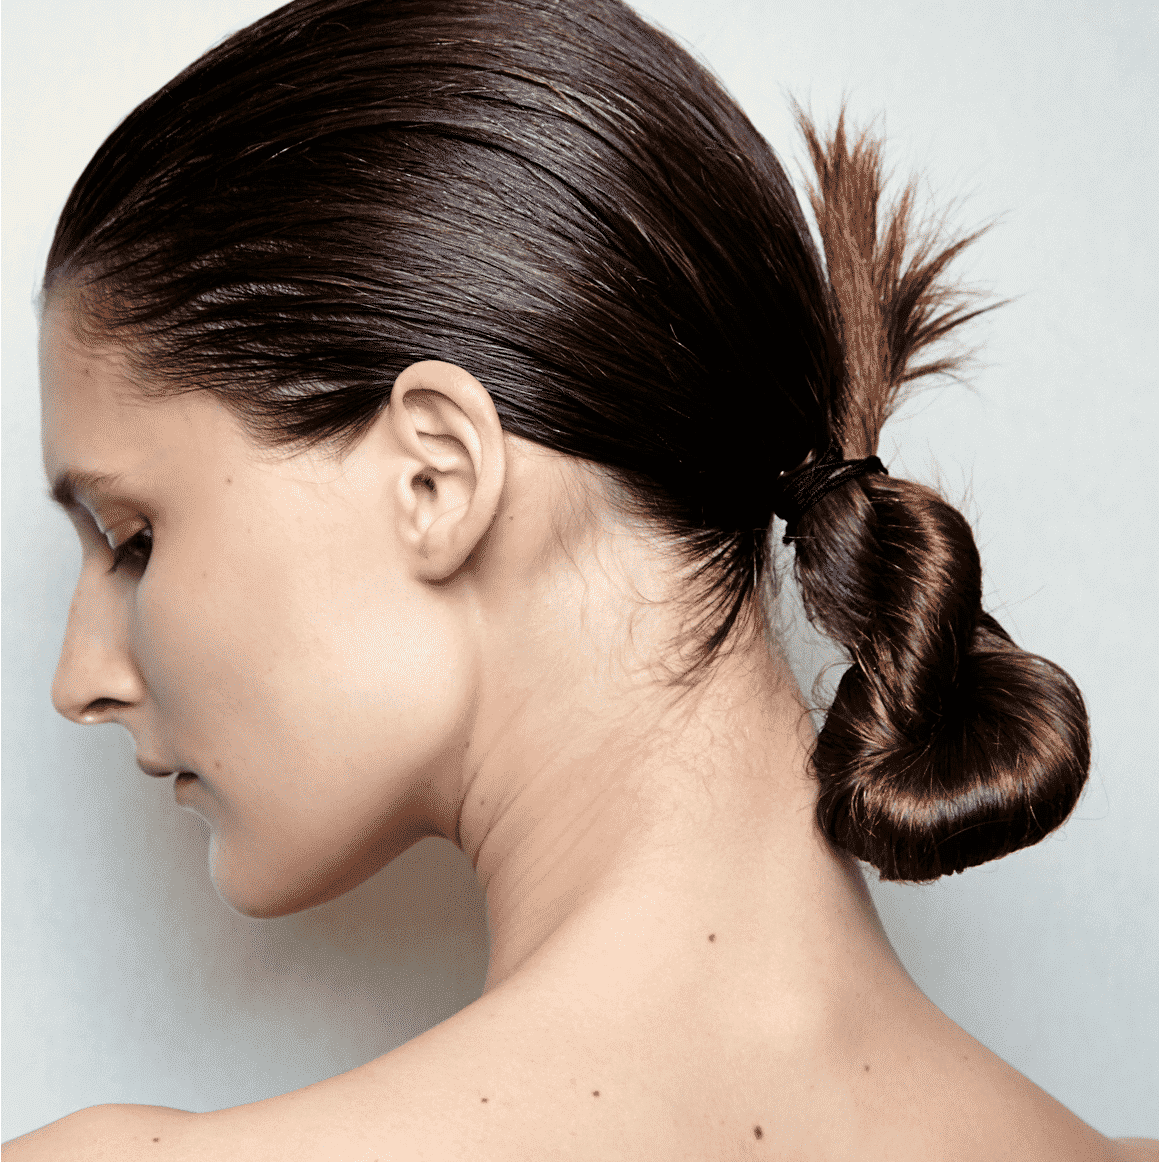 Hairstyles for Greasy Hair